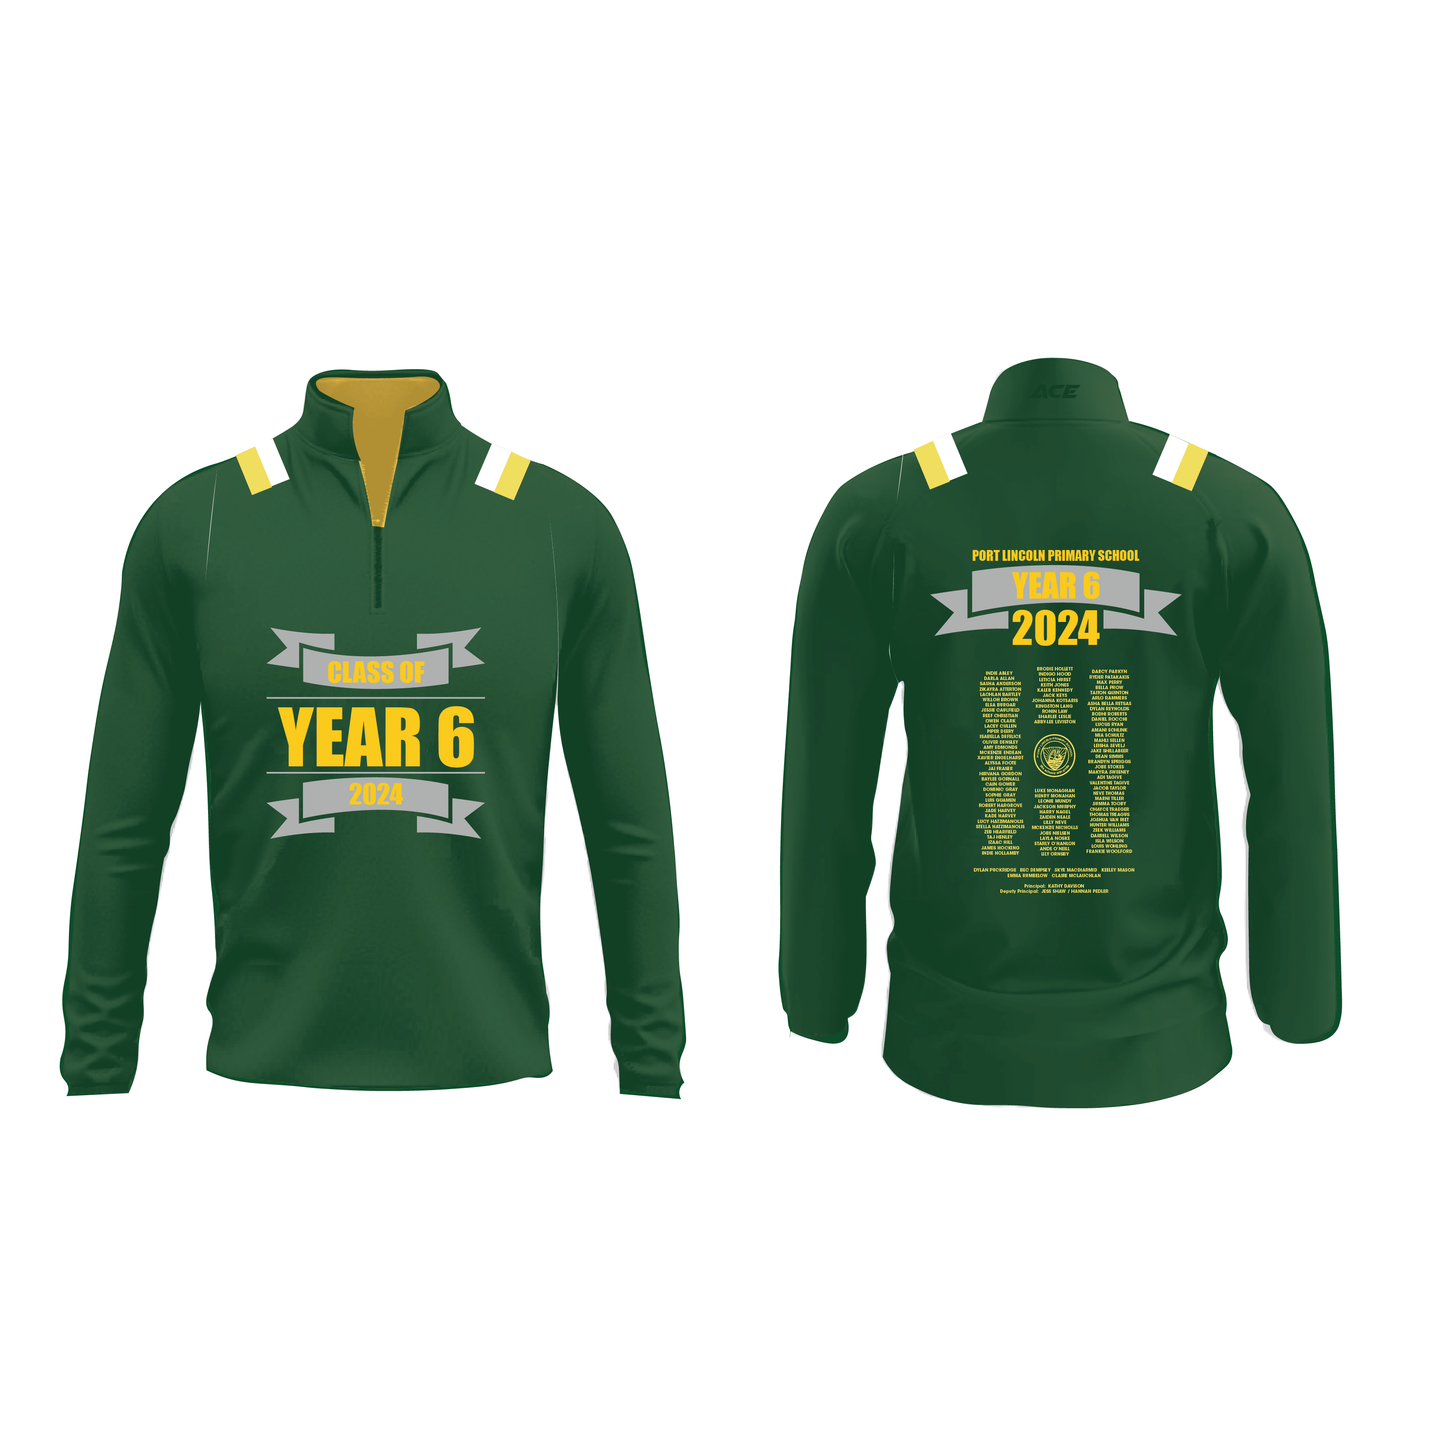 Port Lincoln Primary School Year 6 Jumper 2024